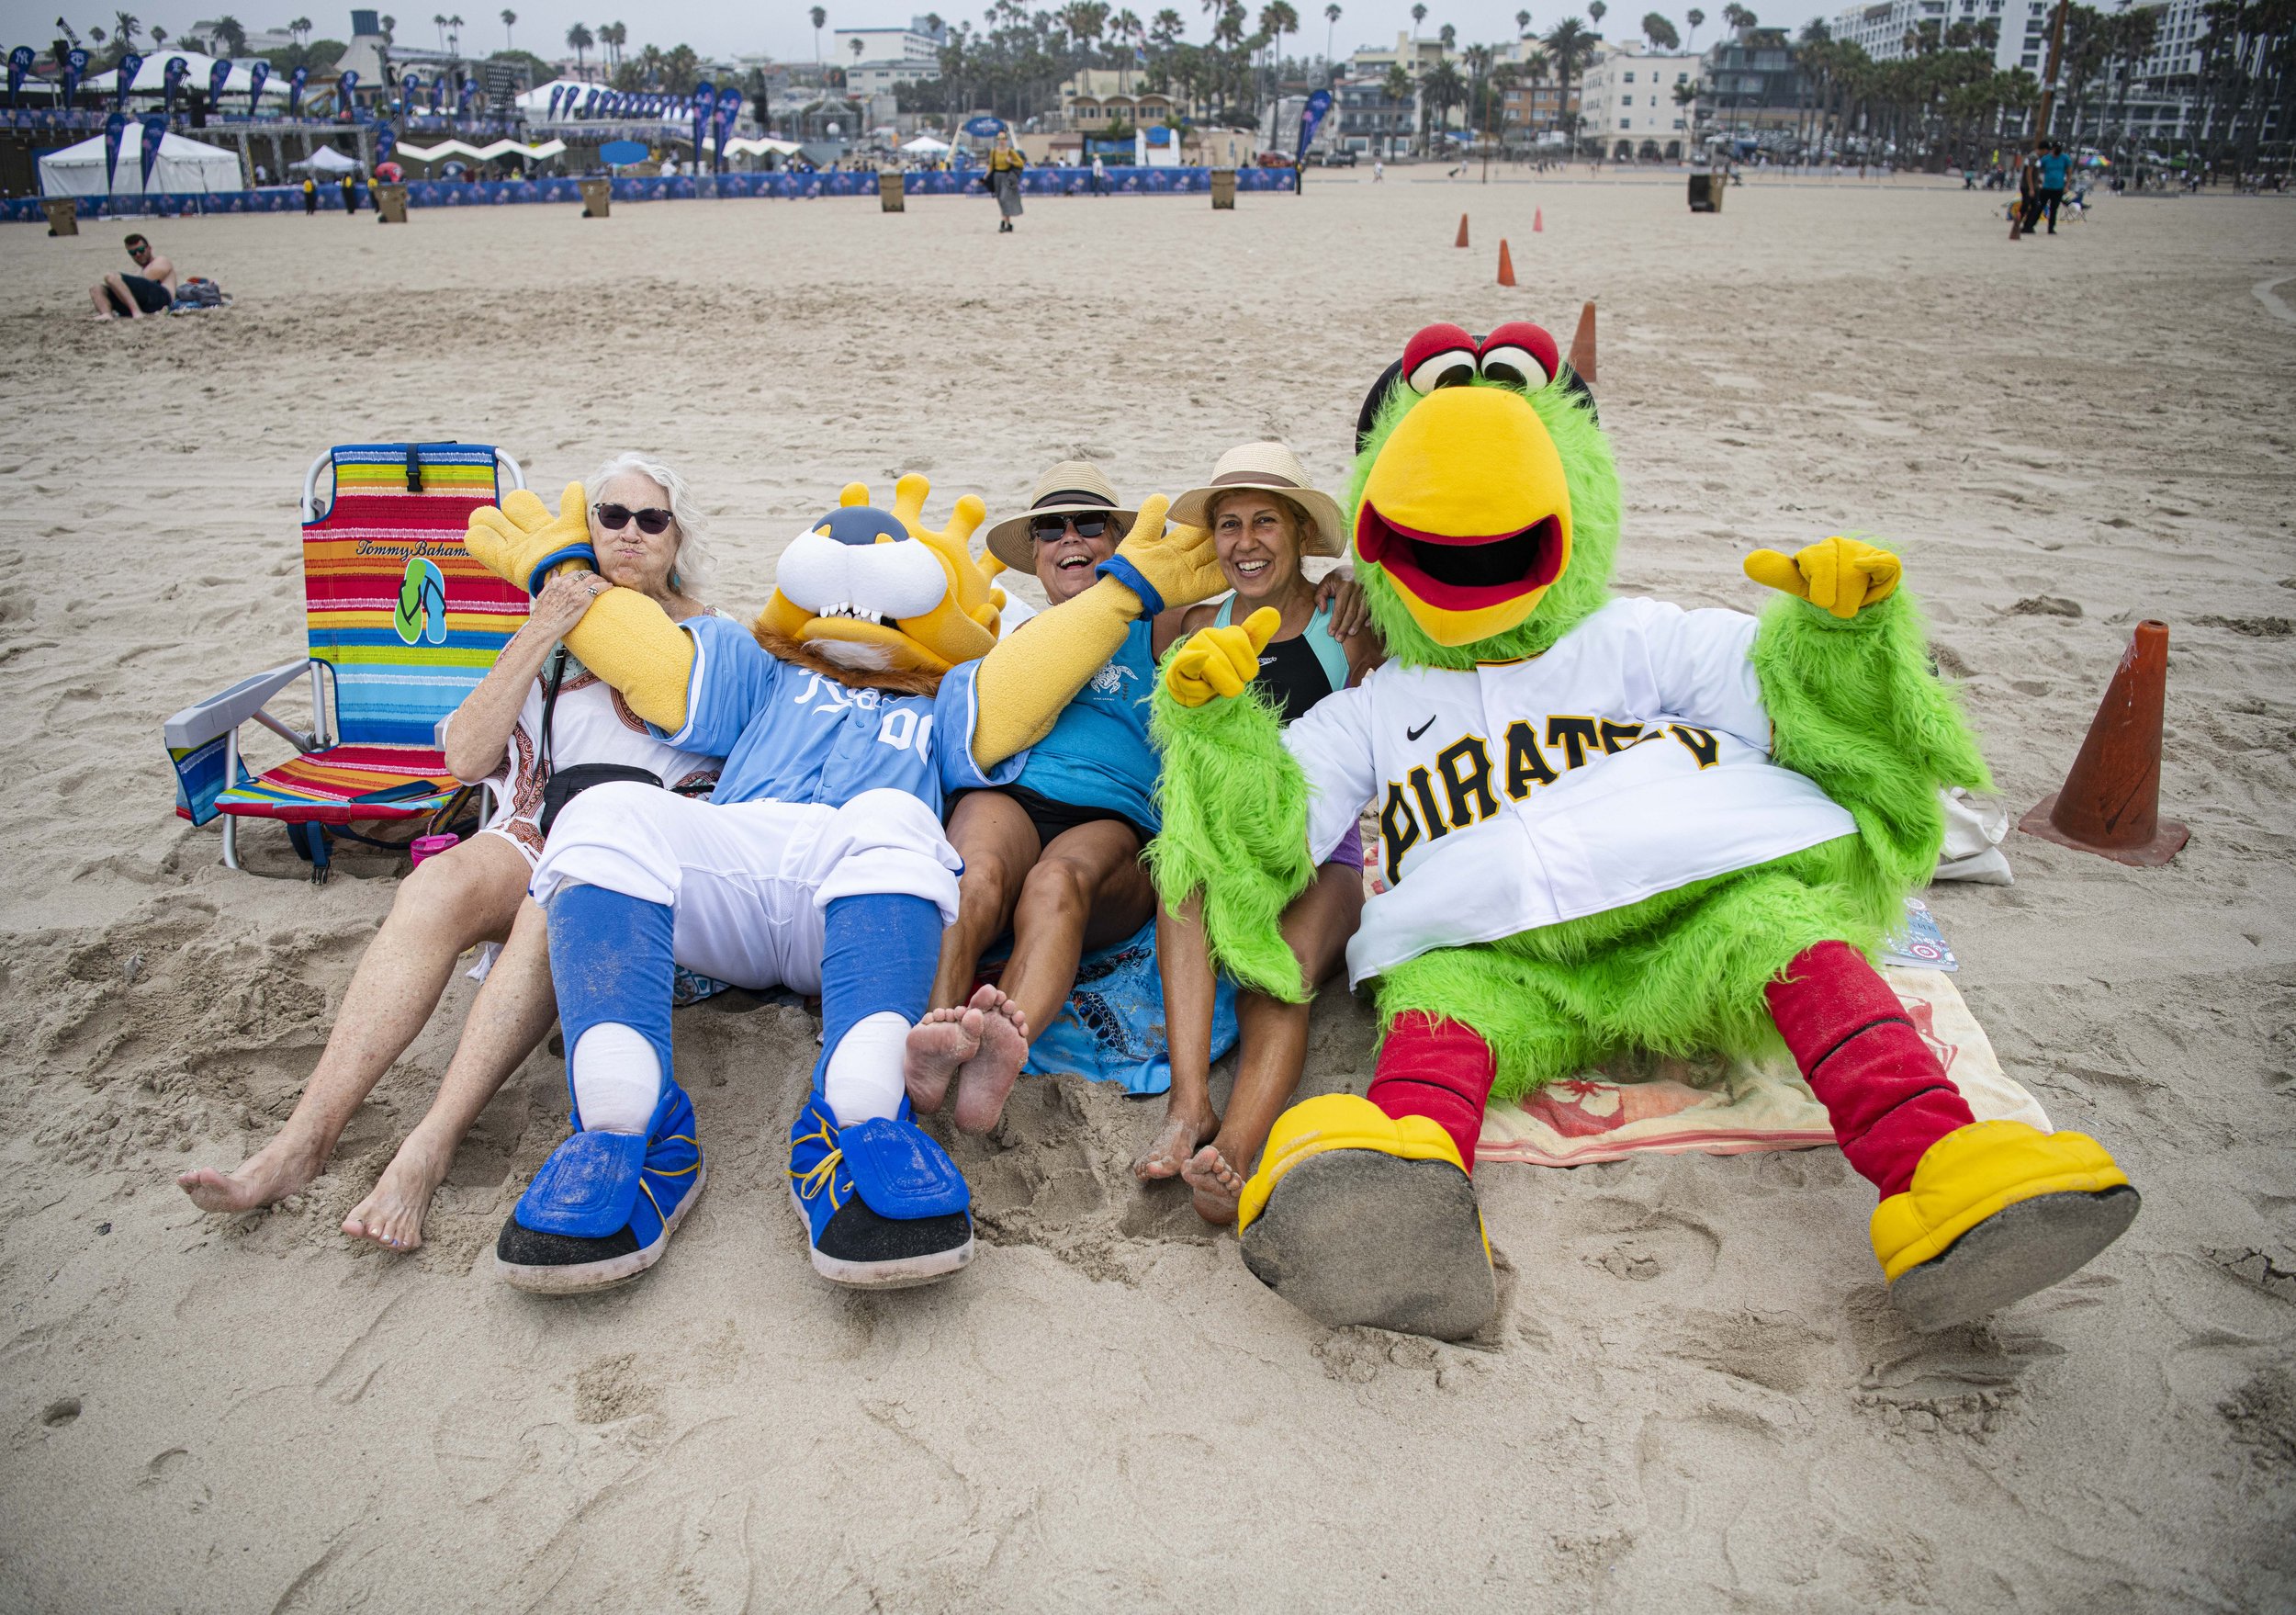  Sluggerrr the Kansas City Royals Mascott (left) and Pirate Parrot the Pittsburgh Pirates Mascott lay with fans on the beach after they conclude their race. (Jon Putman | The Corsair) 